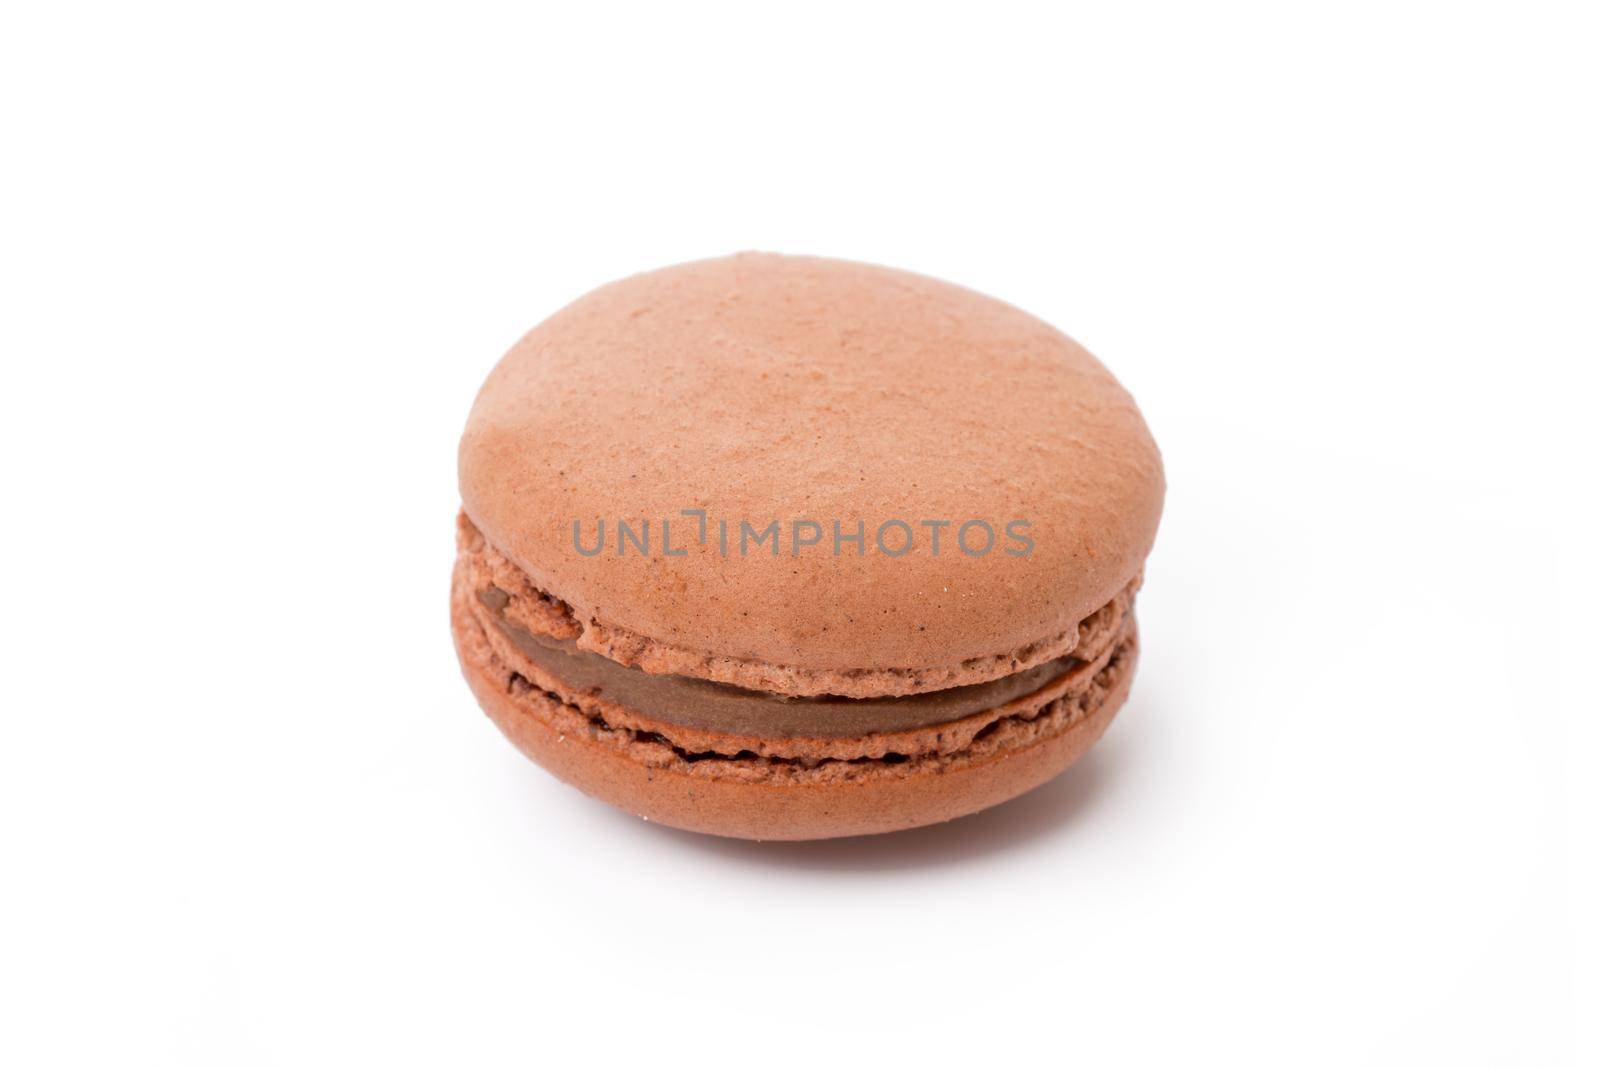 French colored macaroon cookie isolated on white by Fabrikasimf